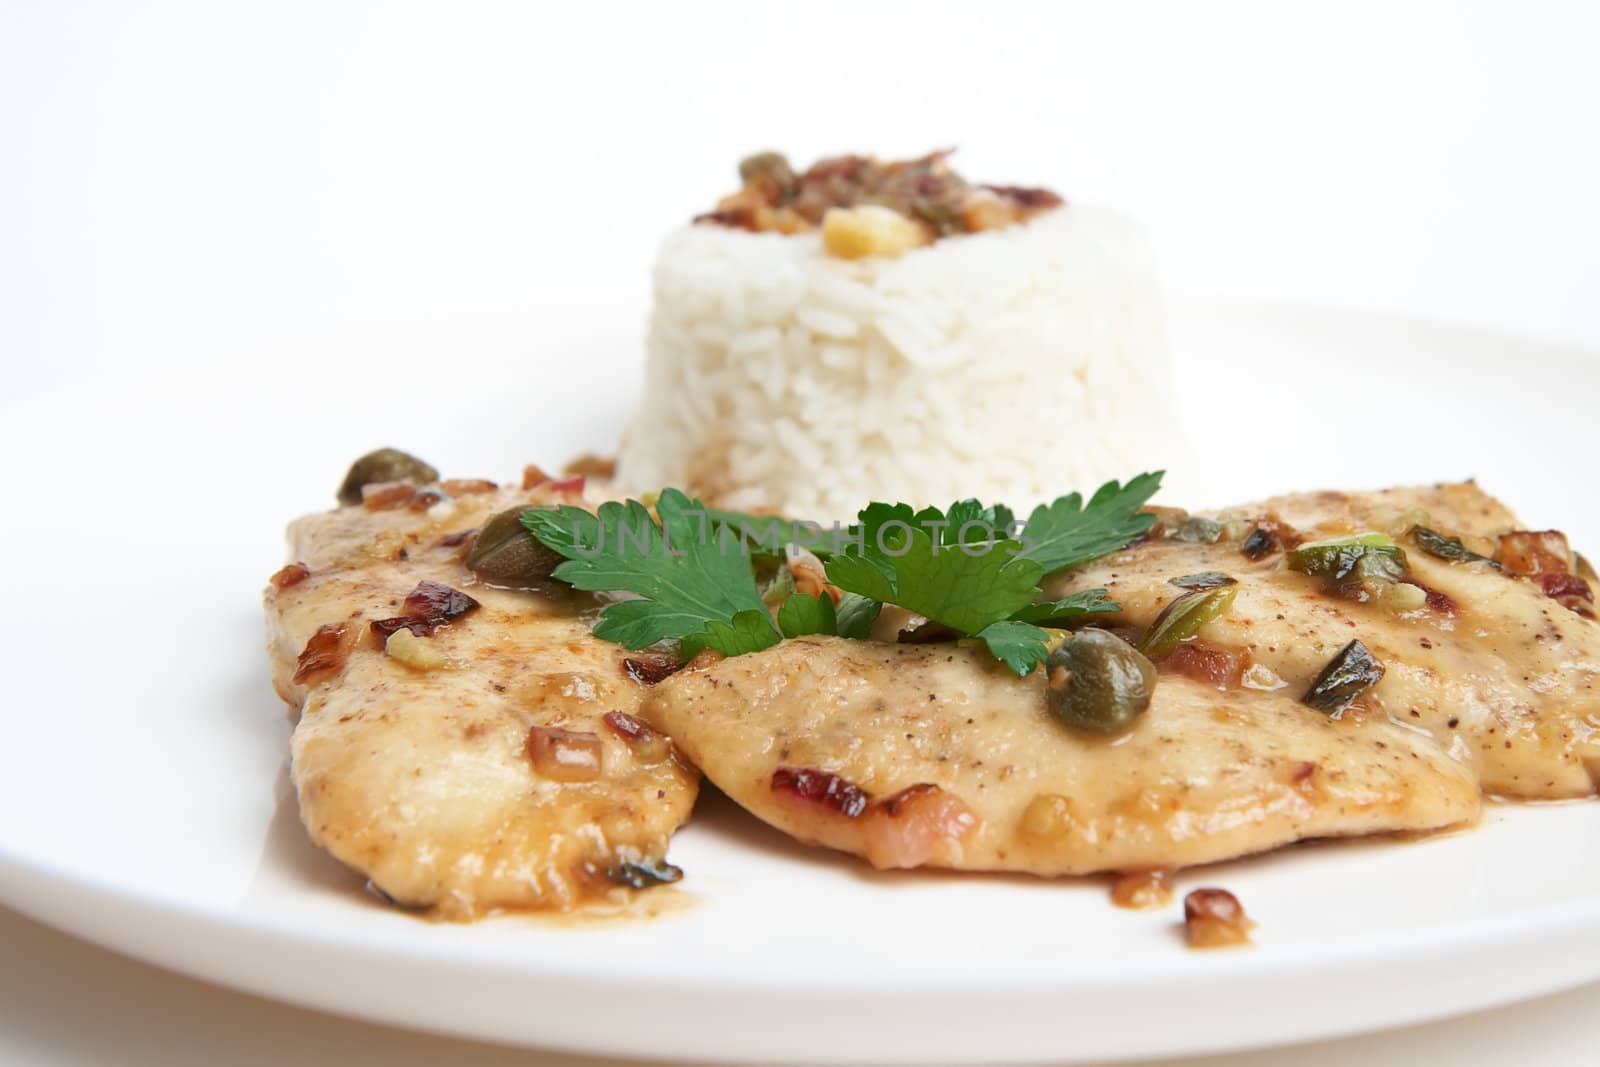 Chicken picatta with rice, shallow DOF